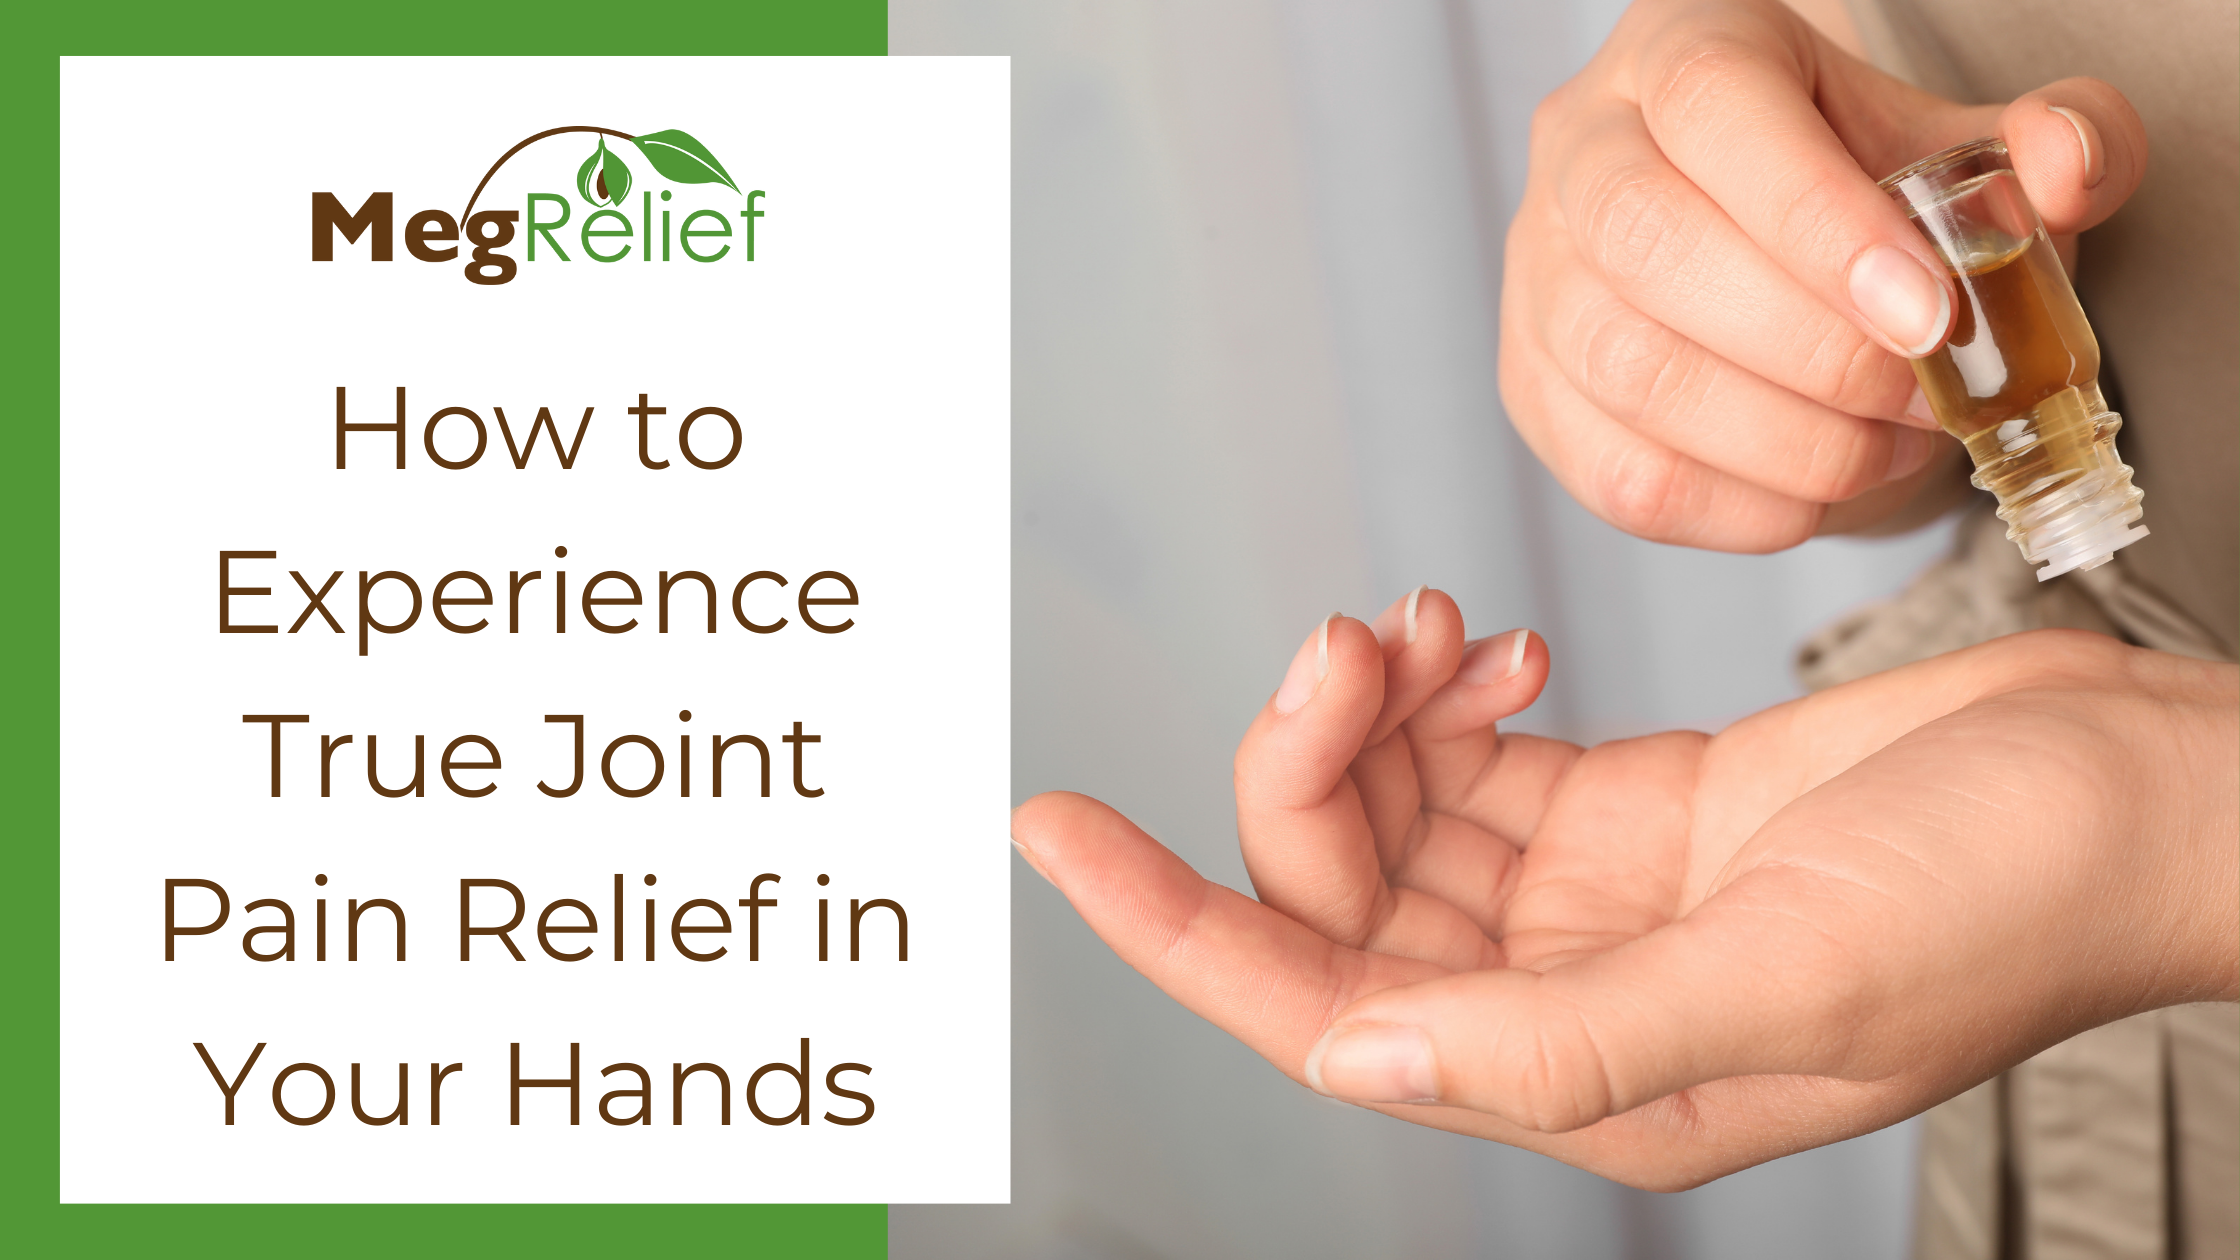 How to Experience True Joint Pain Relief in Your Hands